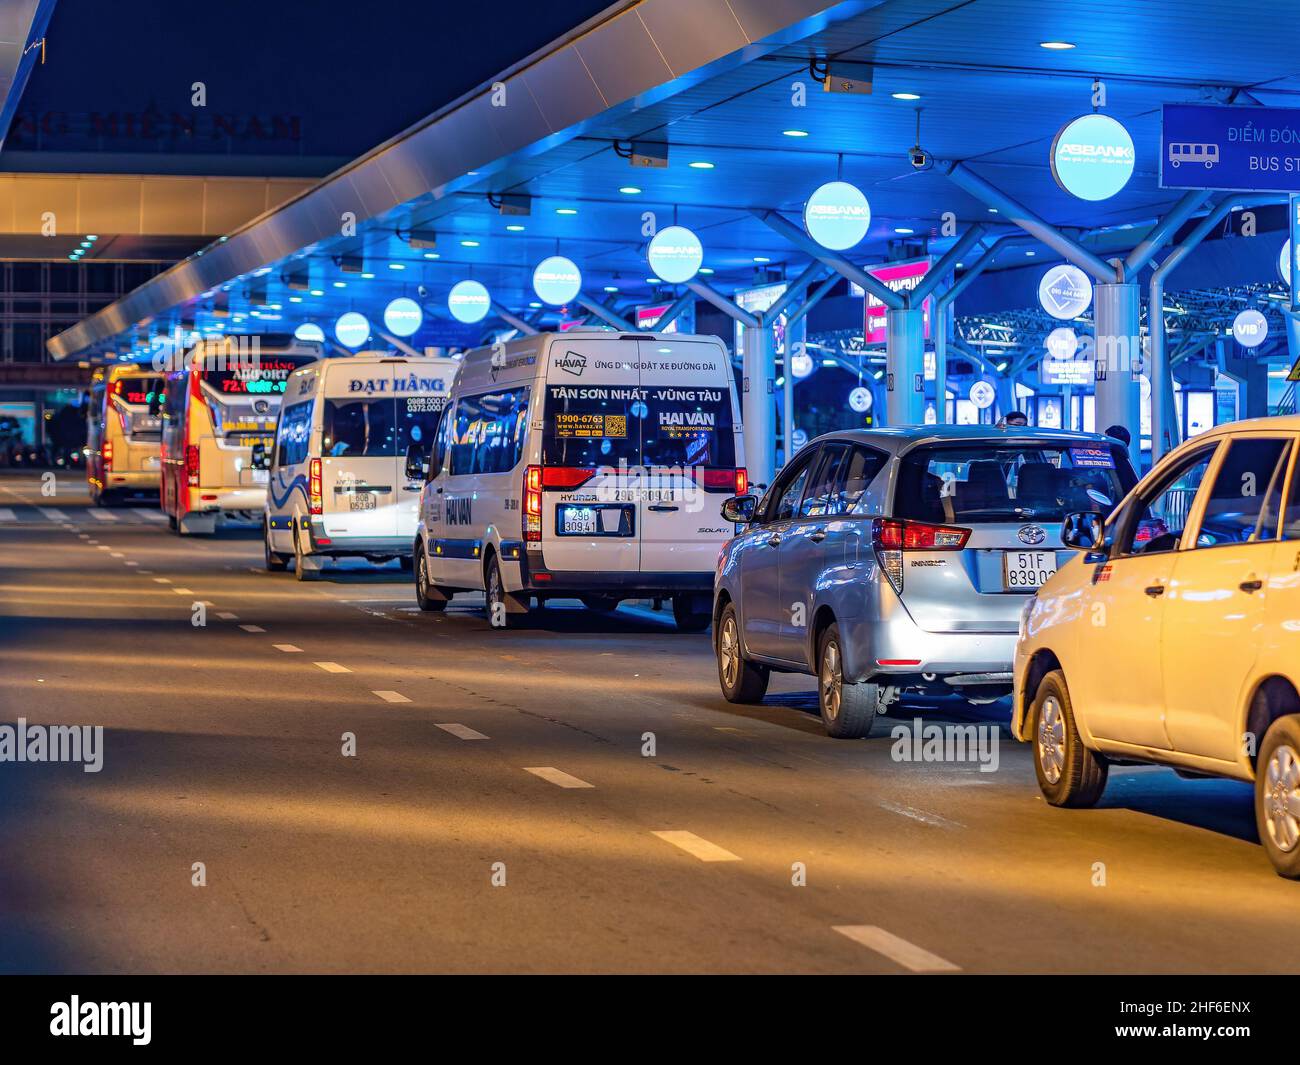 Taxis and buses waiting at night for arriving passengers at the domestic terminal of Tan Son Nhat International Airport in Ho Chi Minh City, Vietnam. Stock Photo